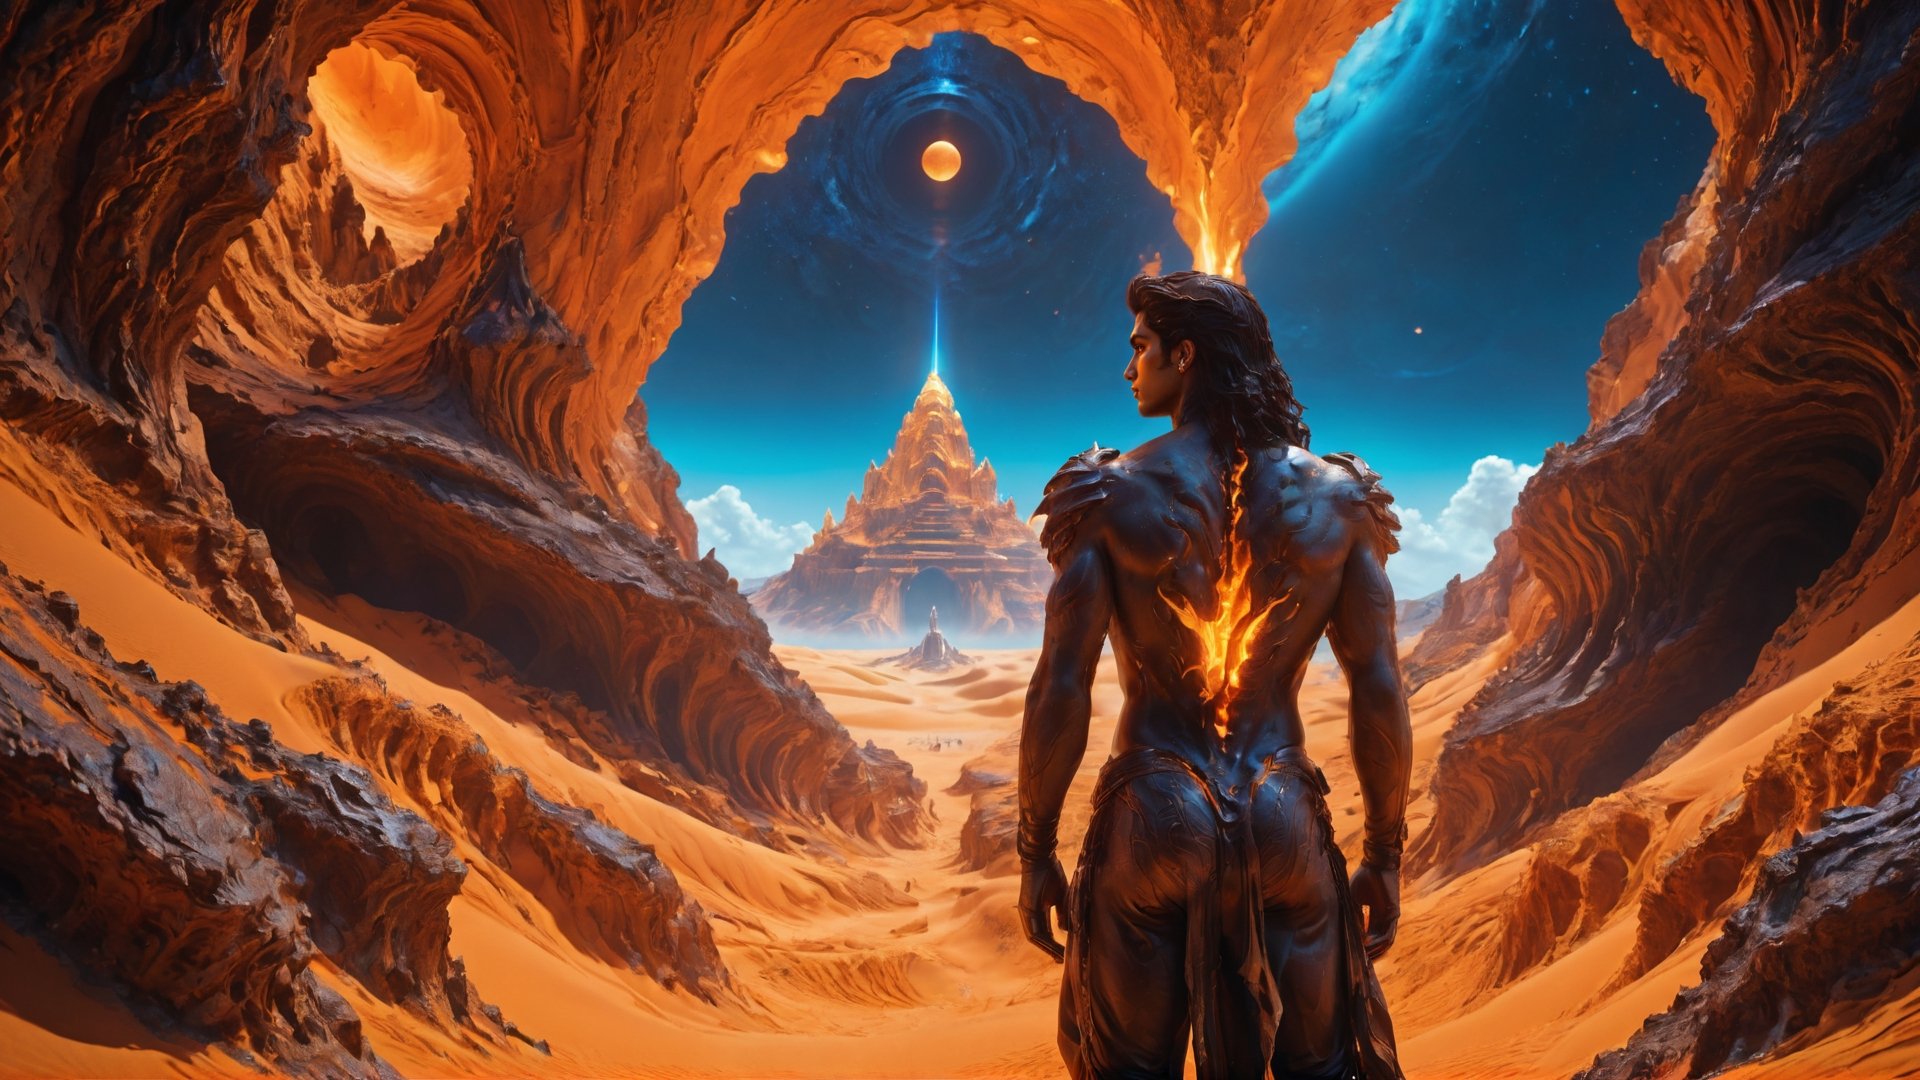 (((Cinematic of giant_man, Shiva:2, upper_body, stay in the sky, Wearing Outfit Dune style, serene, center))), a deep orange Cave, Glowing, aura, energy, floating debris, Film Still, realistic, Venus Frequency vibration, hyper details, Renaissance Sci-Fi Fantasy